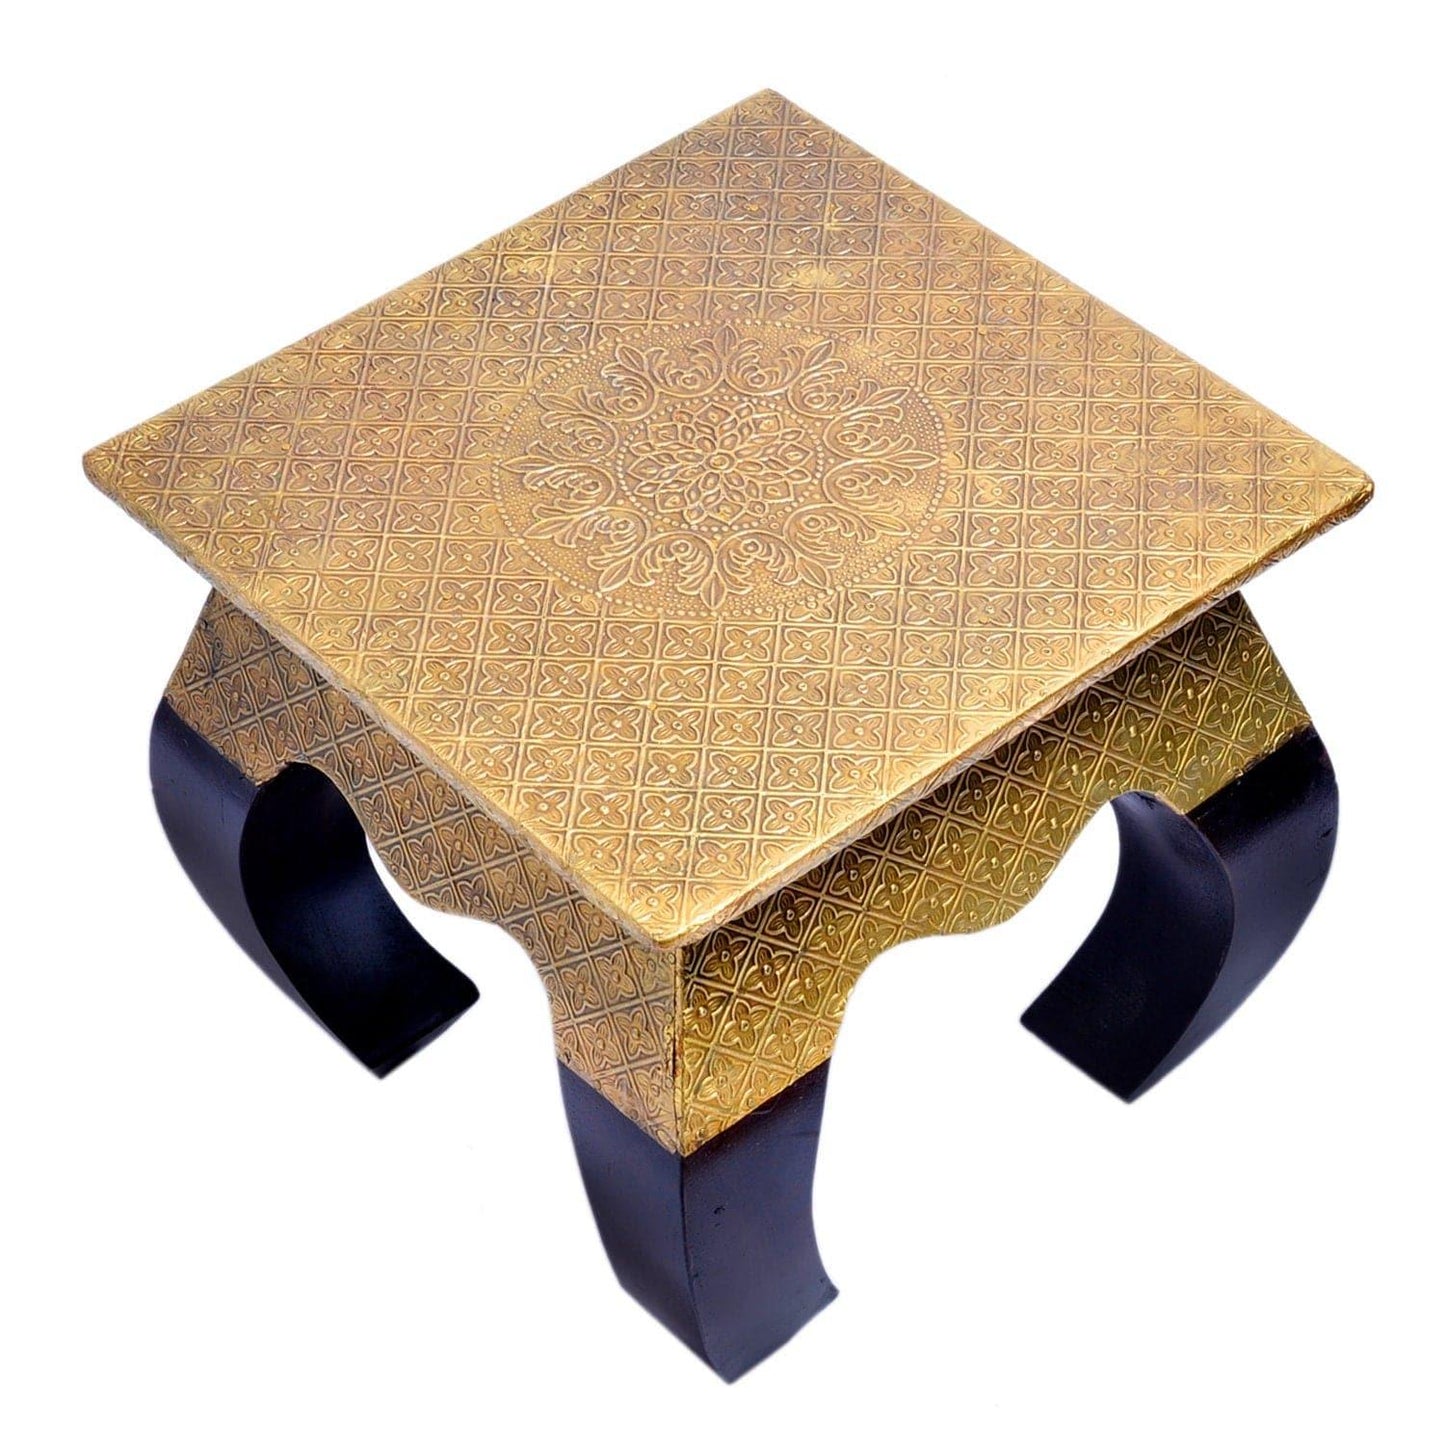 Jaipur Black Wooden and Brass Stool - MAIA HOMES